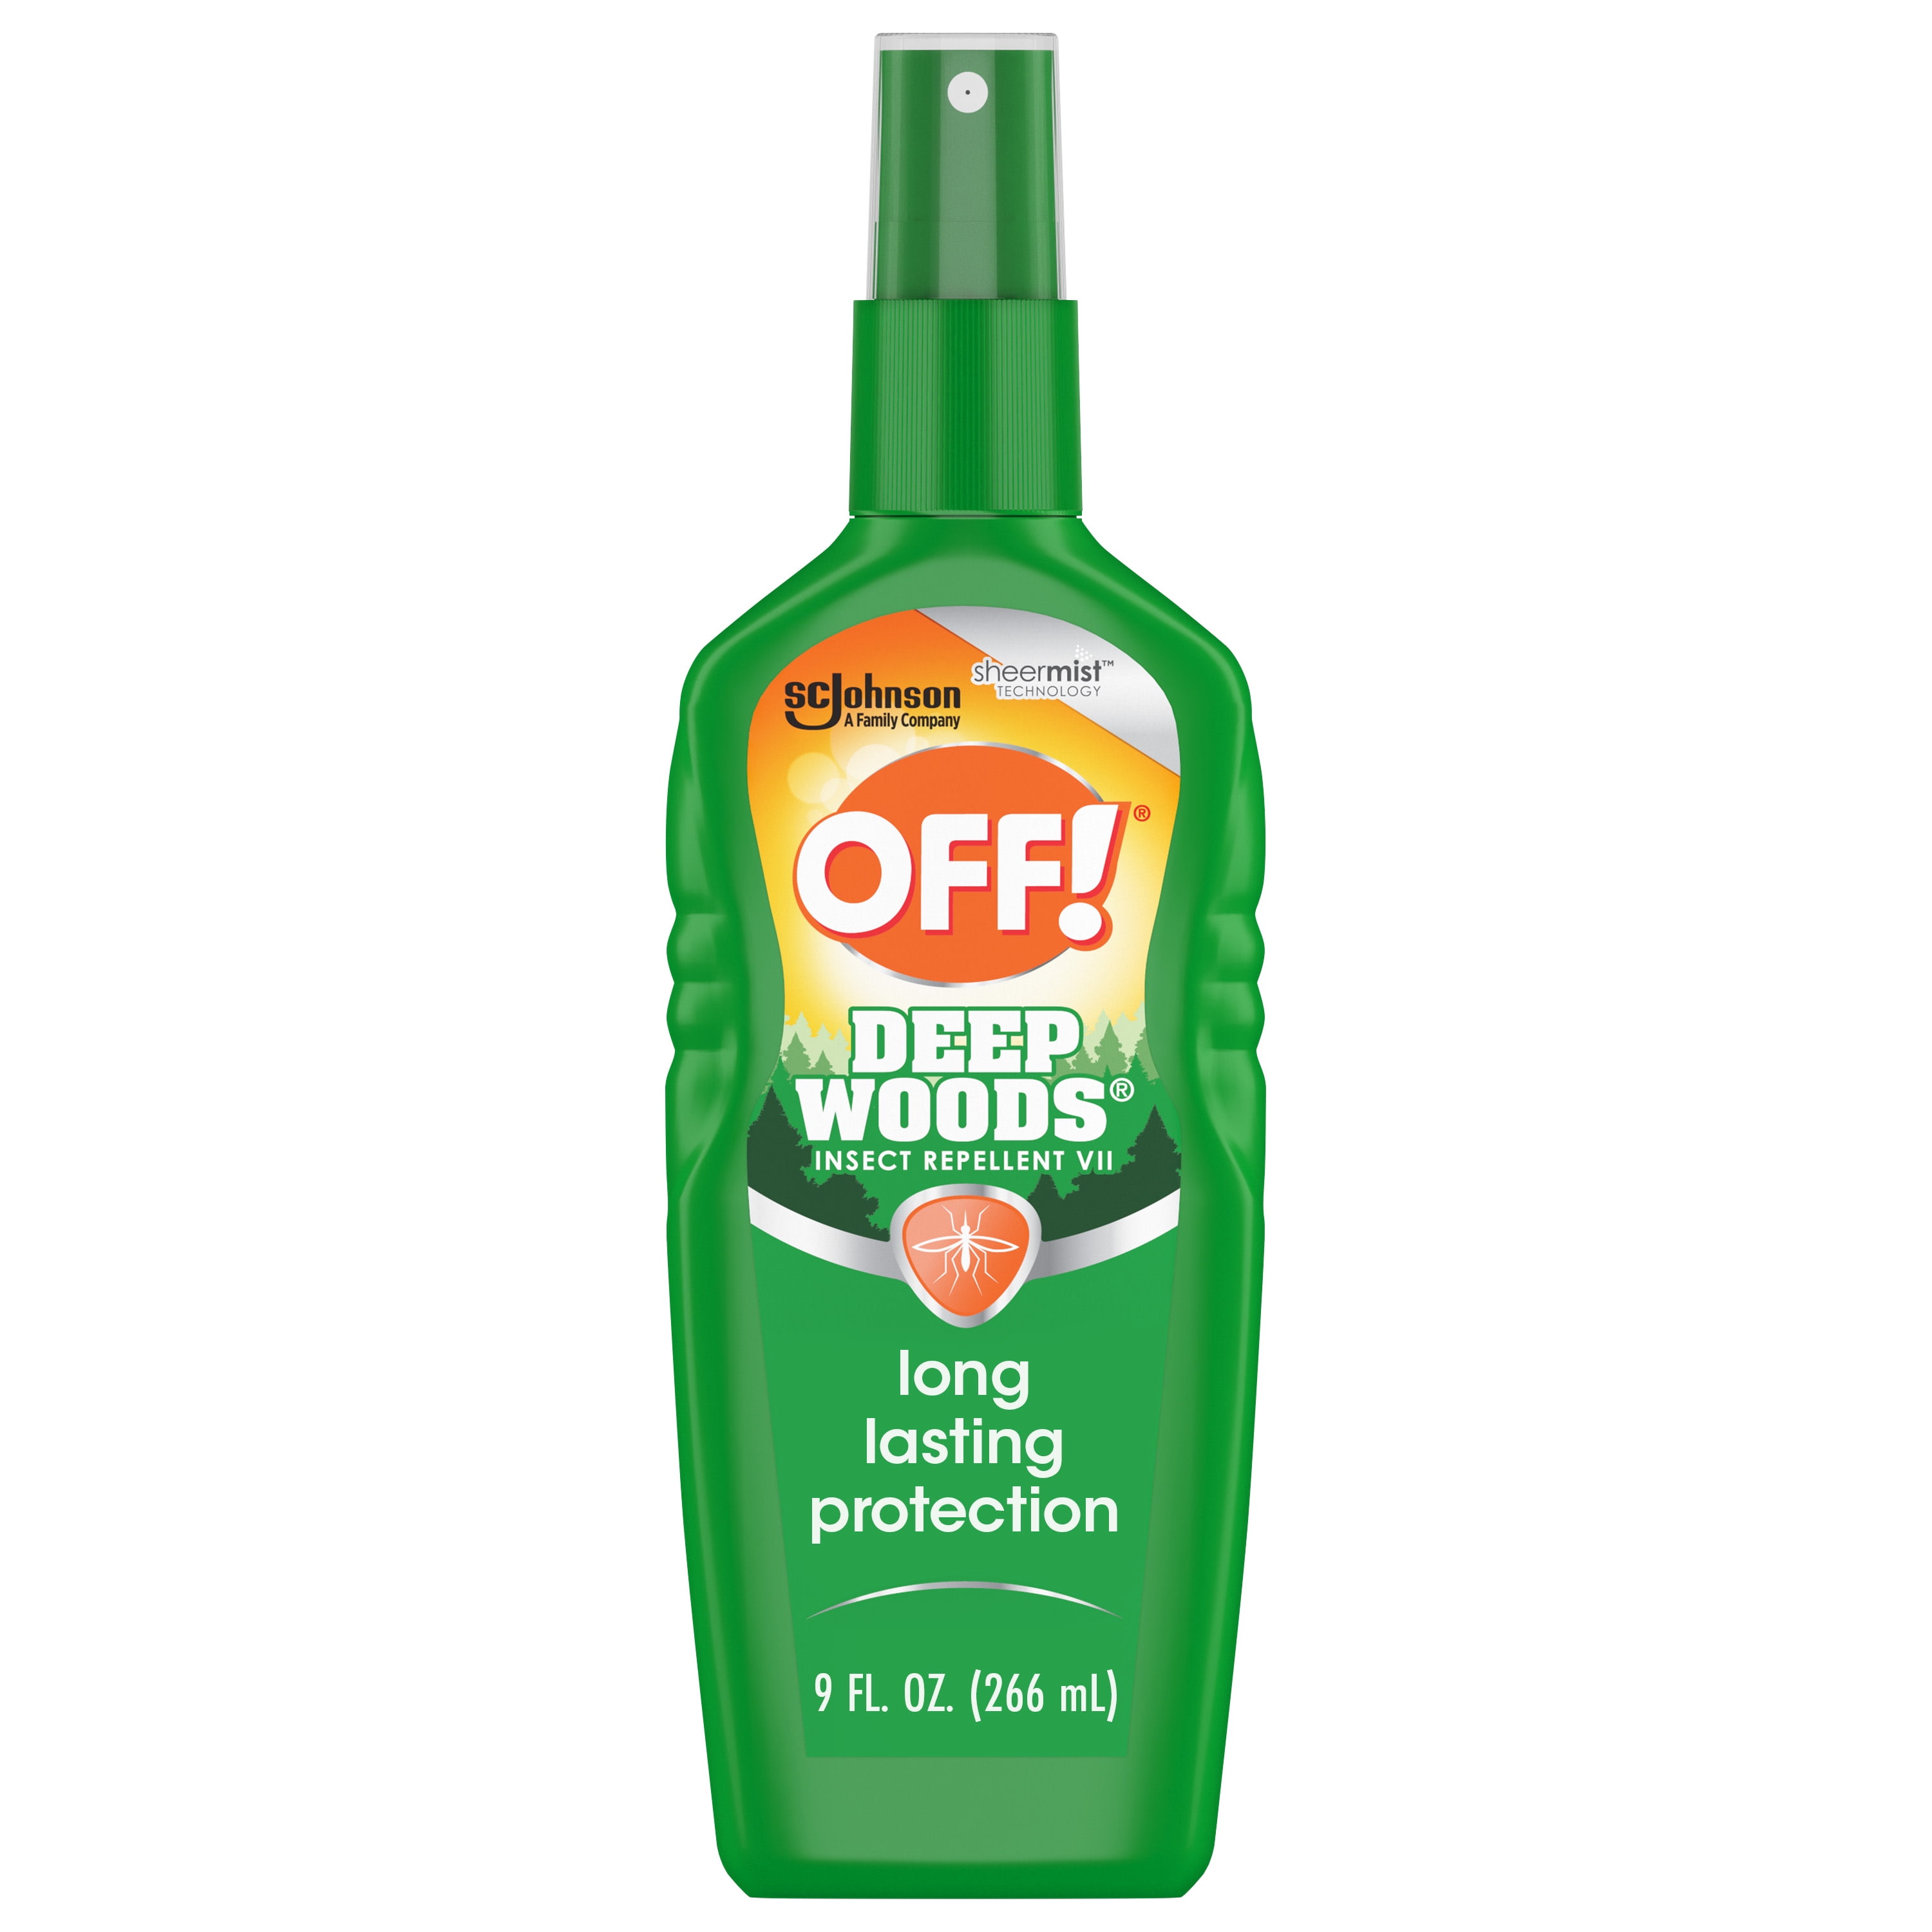 OFF! Deep Woods Insect Repellent VII, 9 Oz